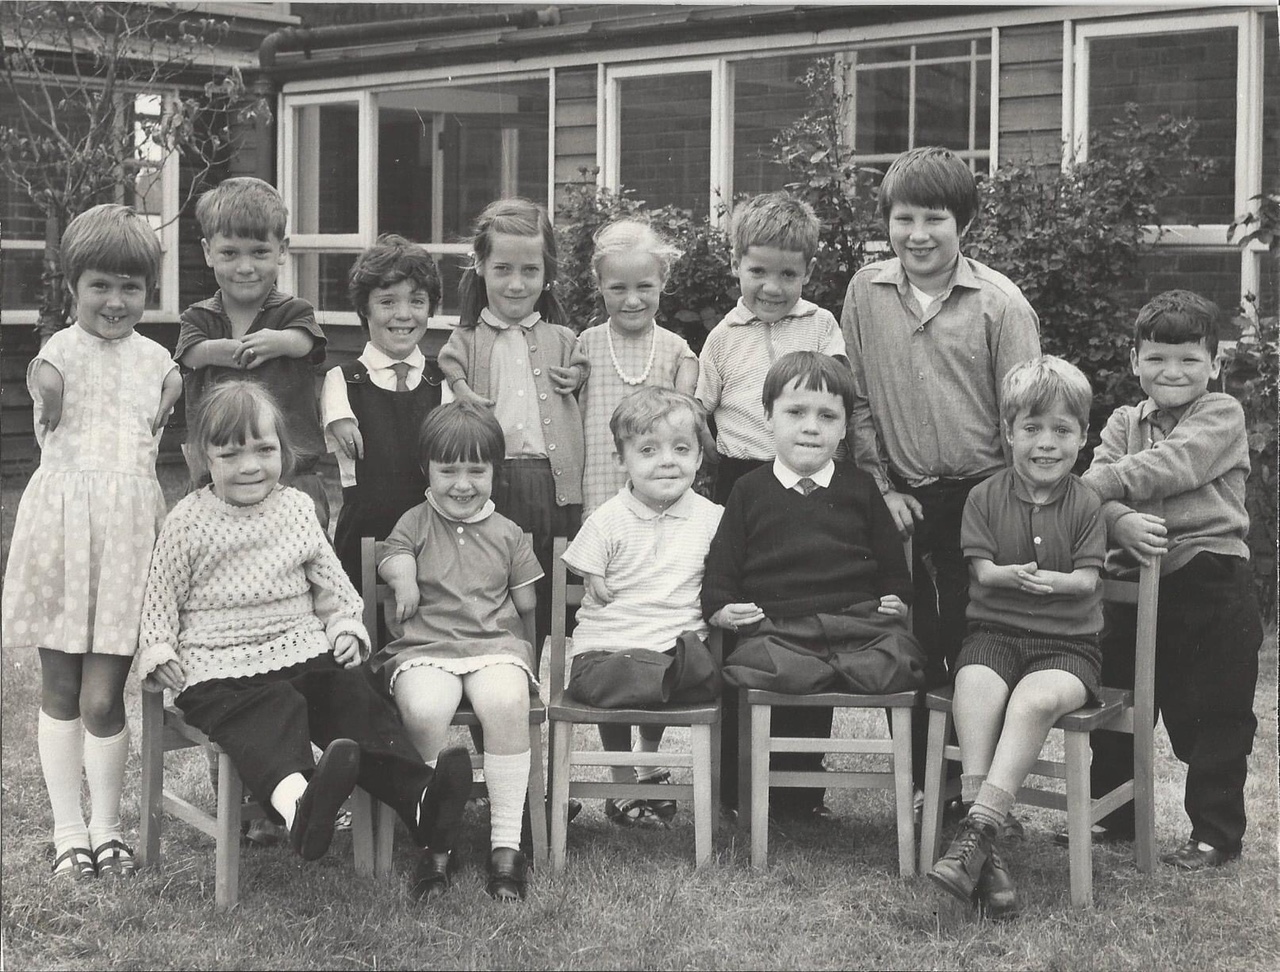 Teresa Smith from Southport is celebrating her 60th birthday. She is pictured here at school in Liverpool